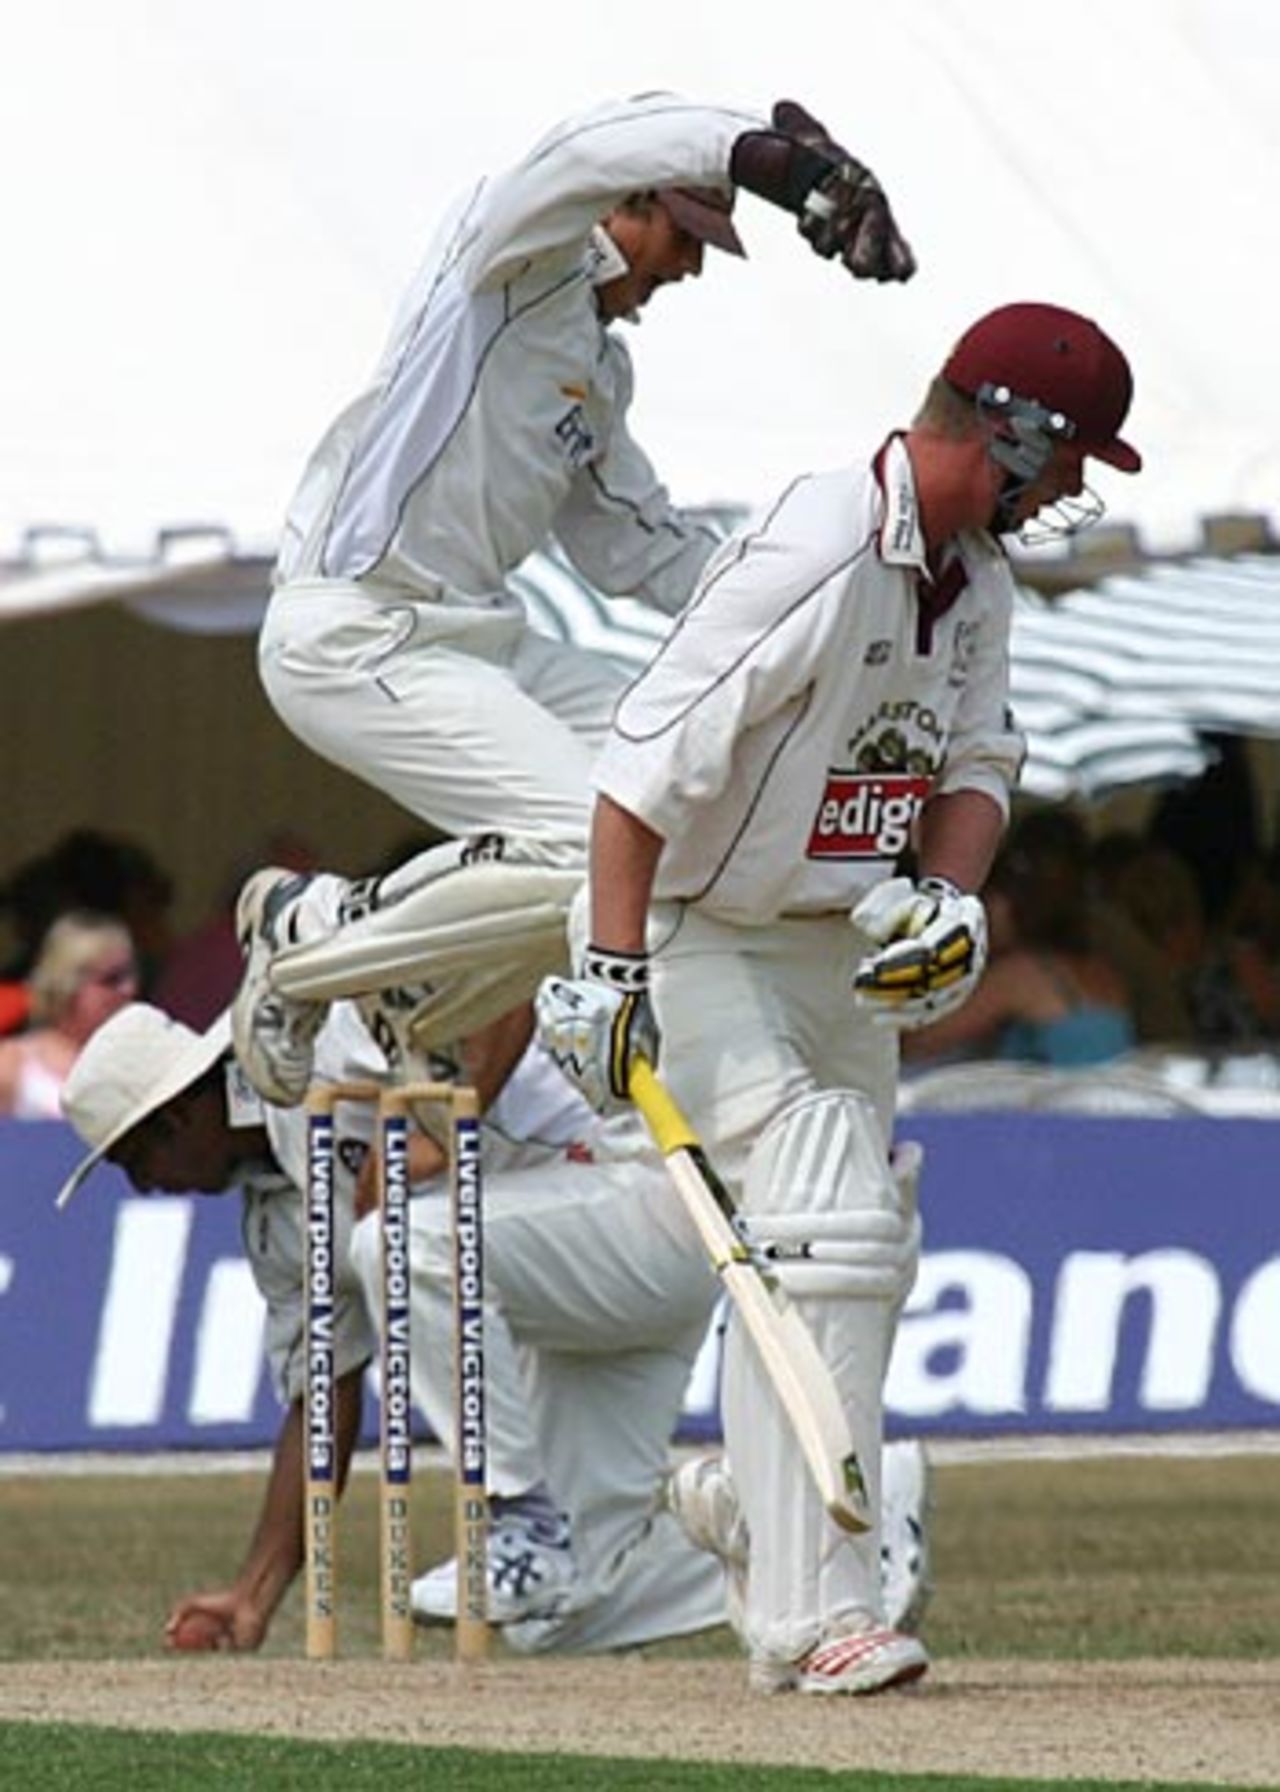 Azhar Mahmood catches Neil Edwards to the delight of Jonathan Batty, Surrey v Somerset, Guildford, July 19, 2006